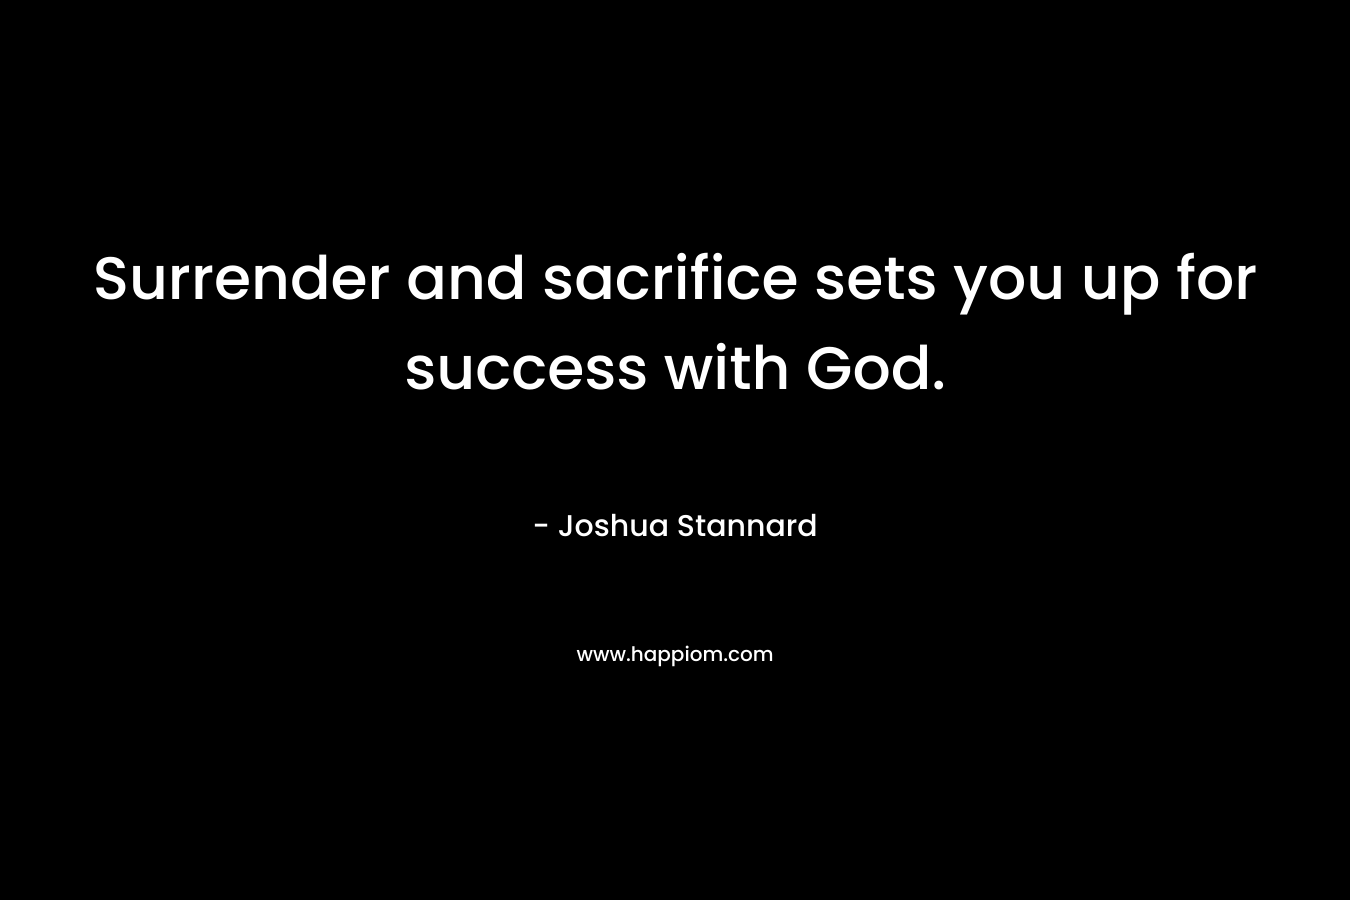 Surrender and sacrifice sets you up for success with God.